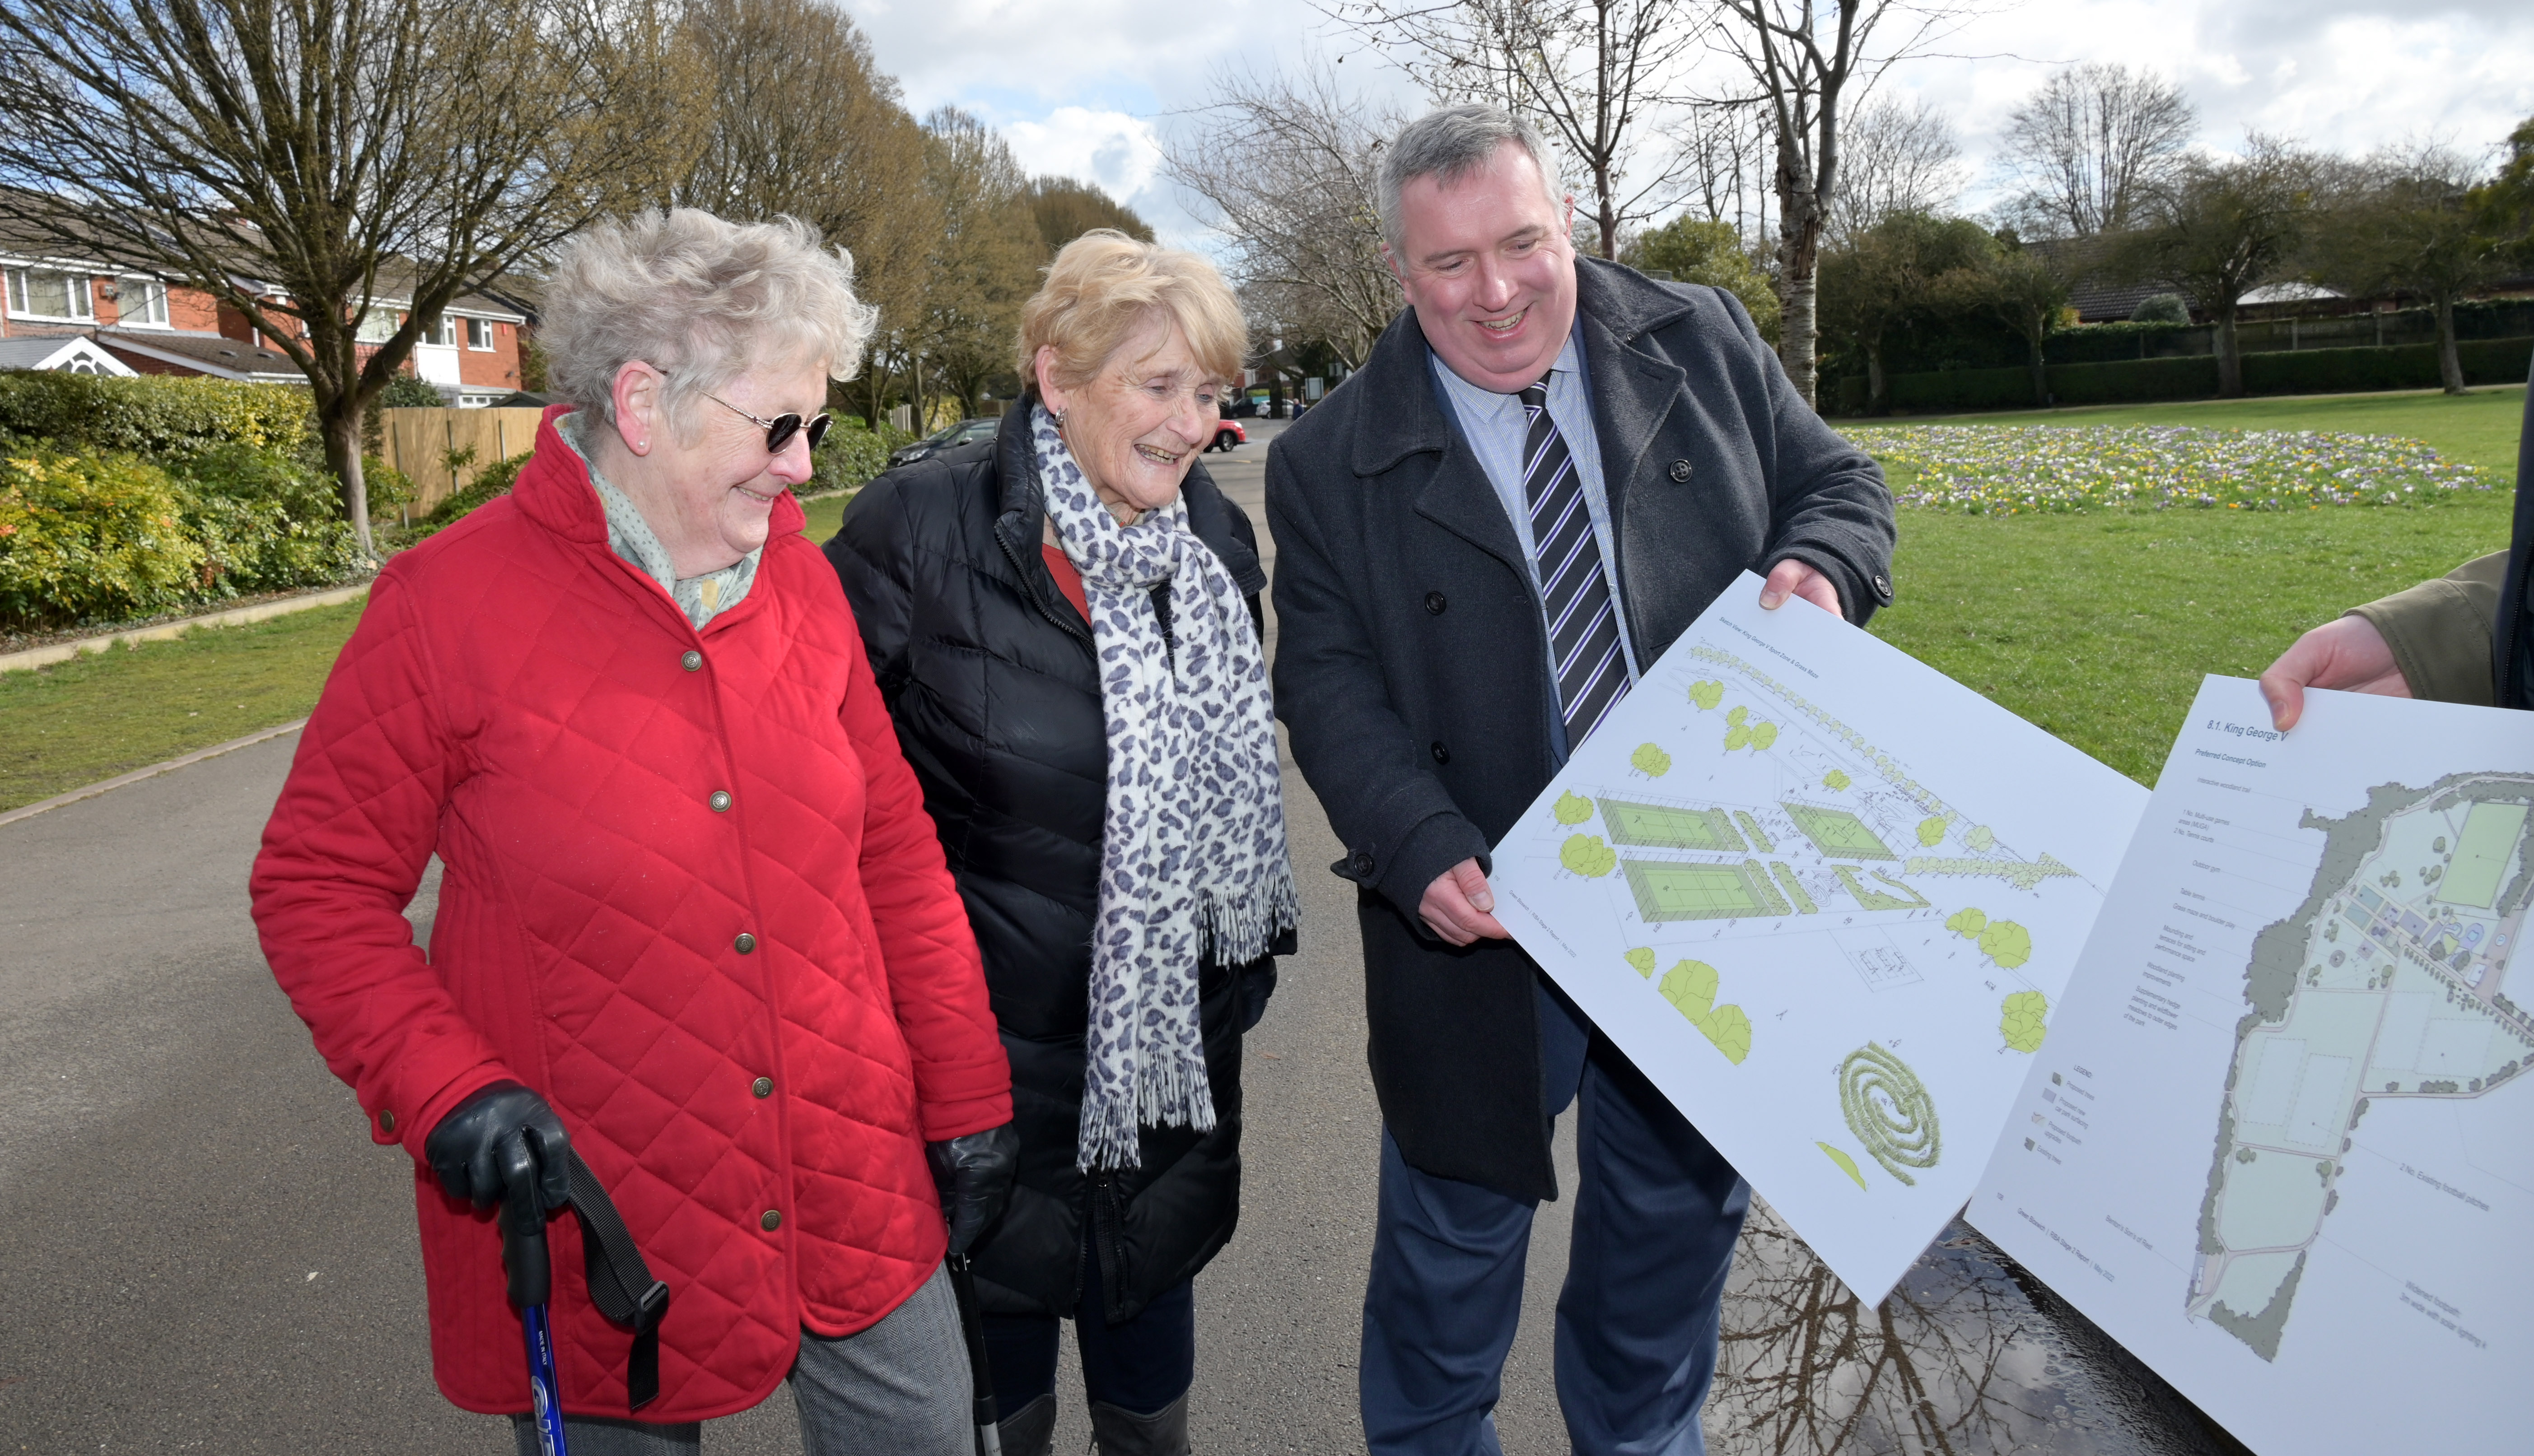 Councillor Andrew showing park improvement plans to two residents walking in the park